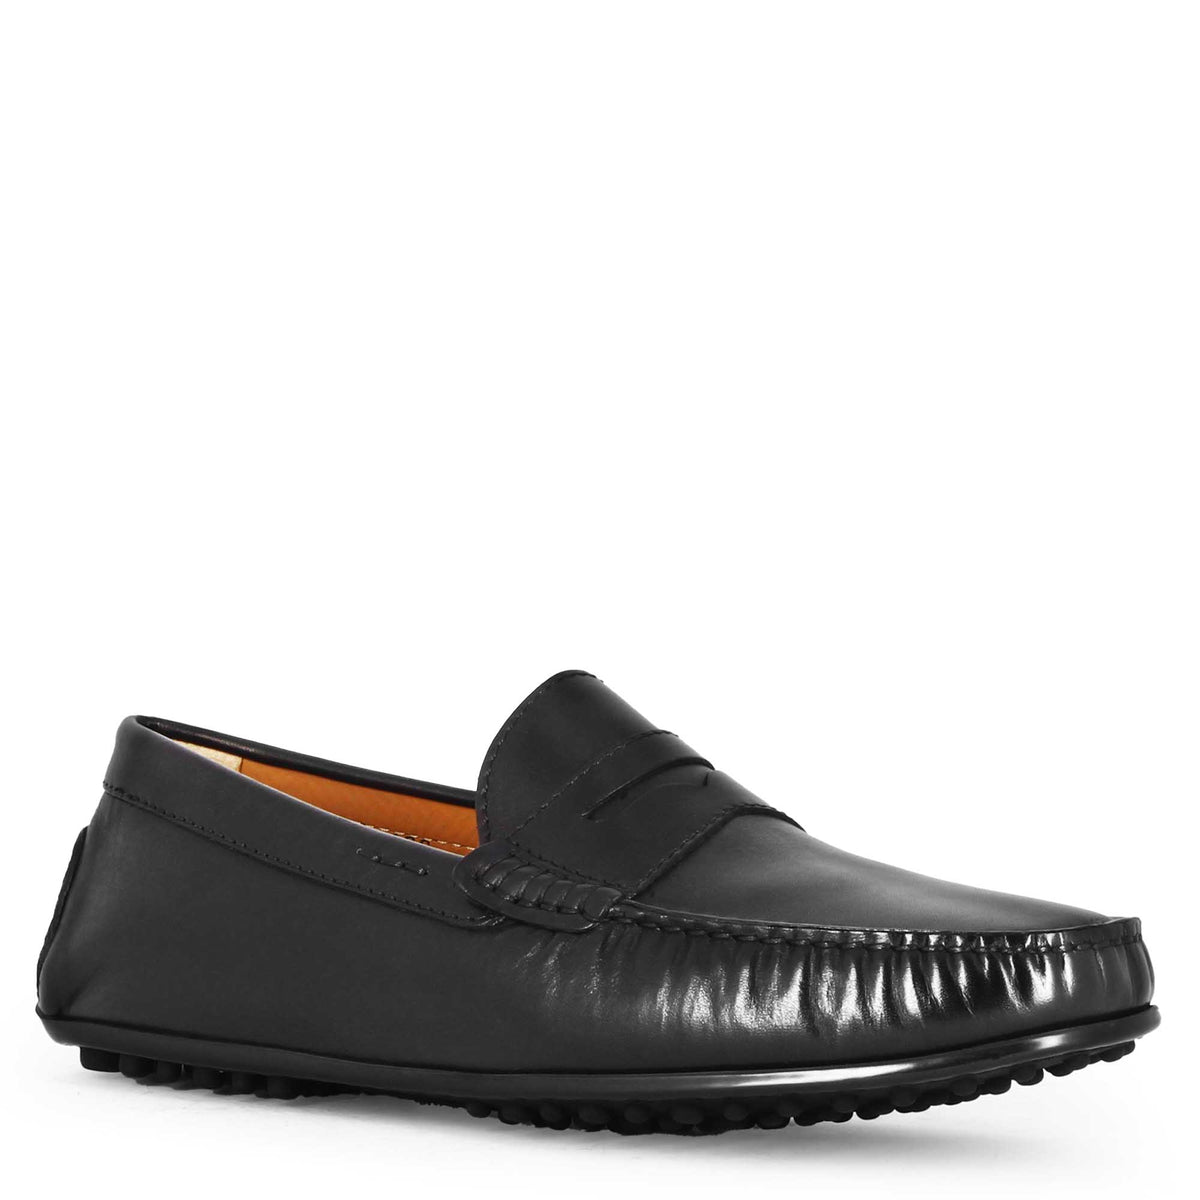 Casual men's moccasin in black leather with rubber pebbled sole